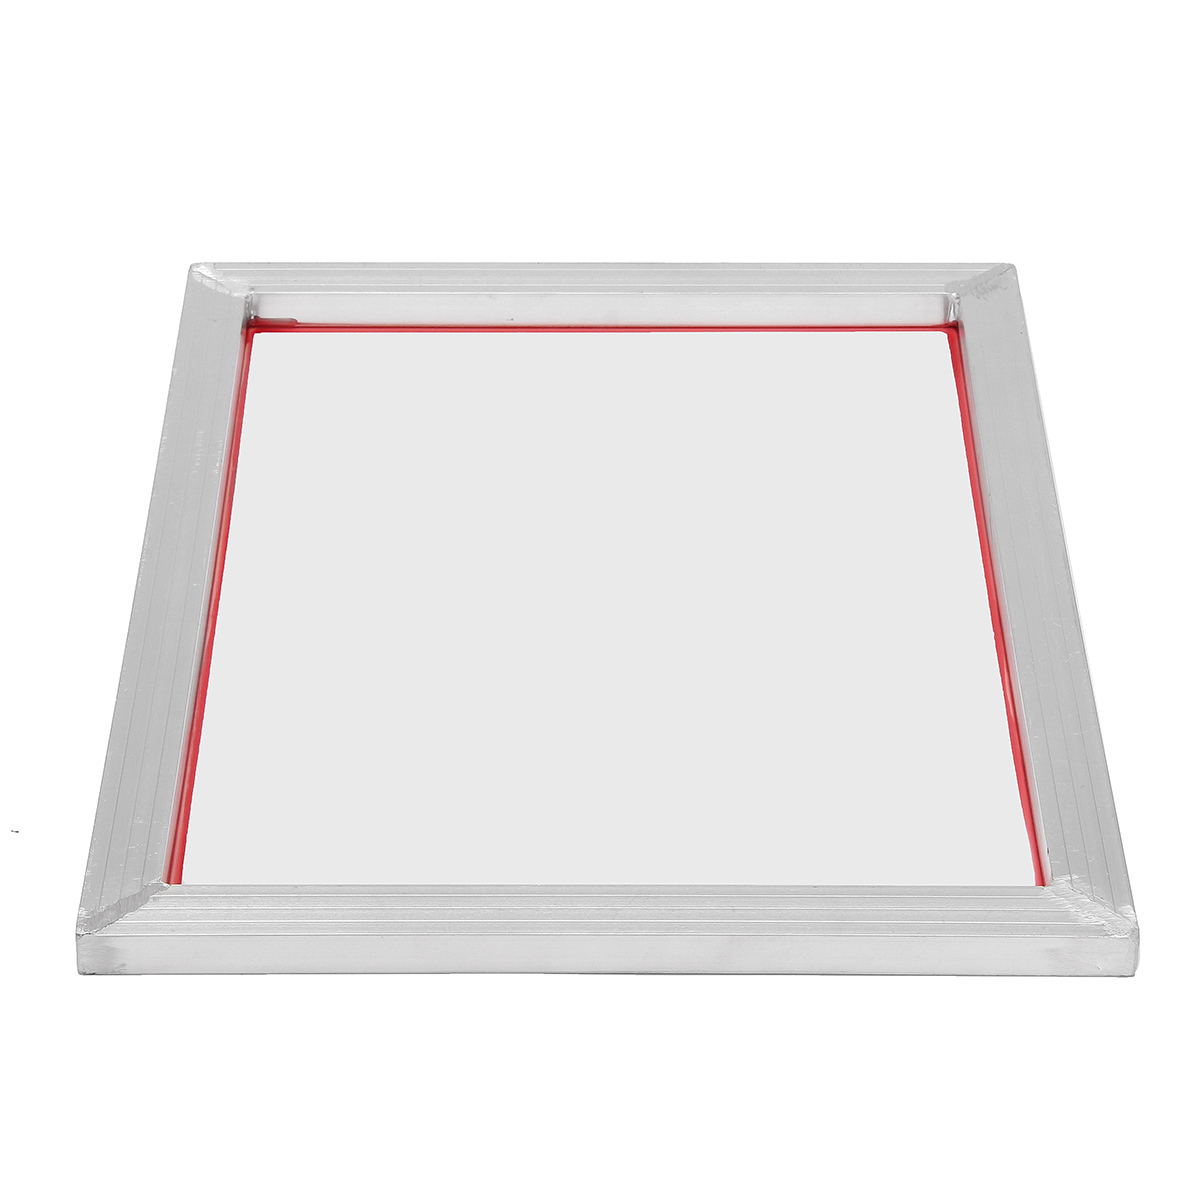 A3 Screen Printing Aluminium Frame Stretched With White 77T Silk Print Mesh 2